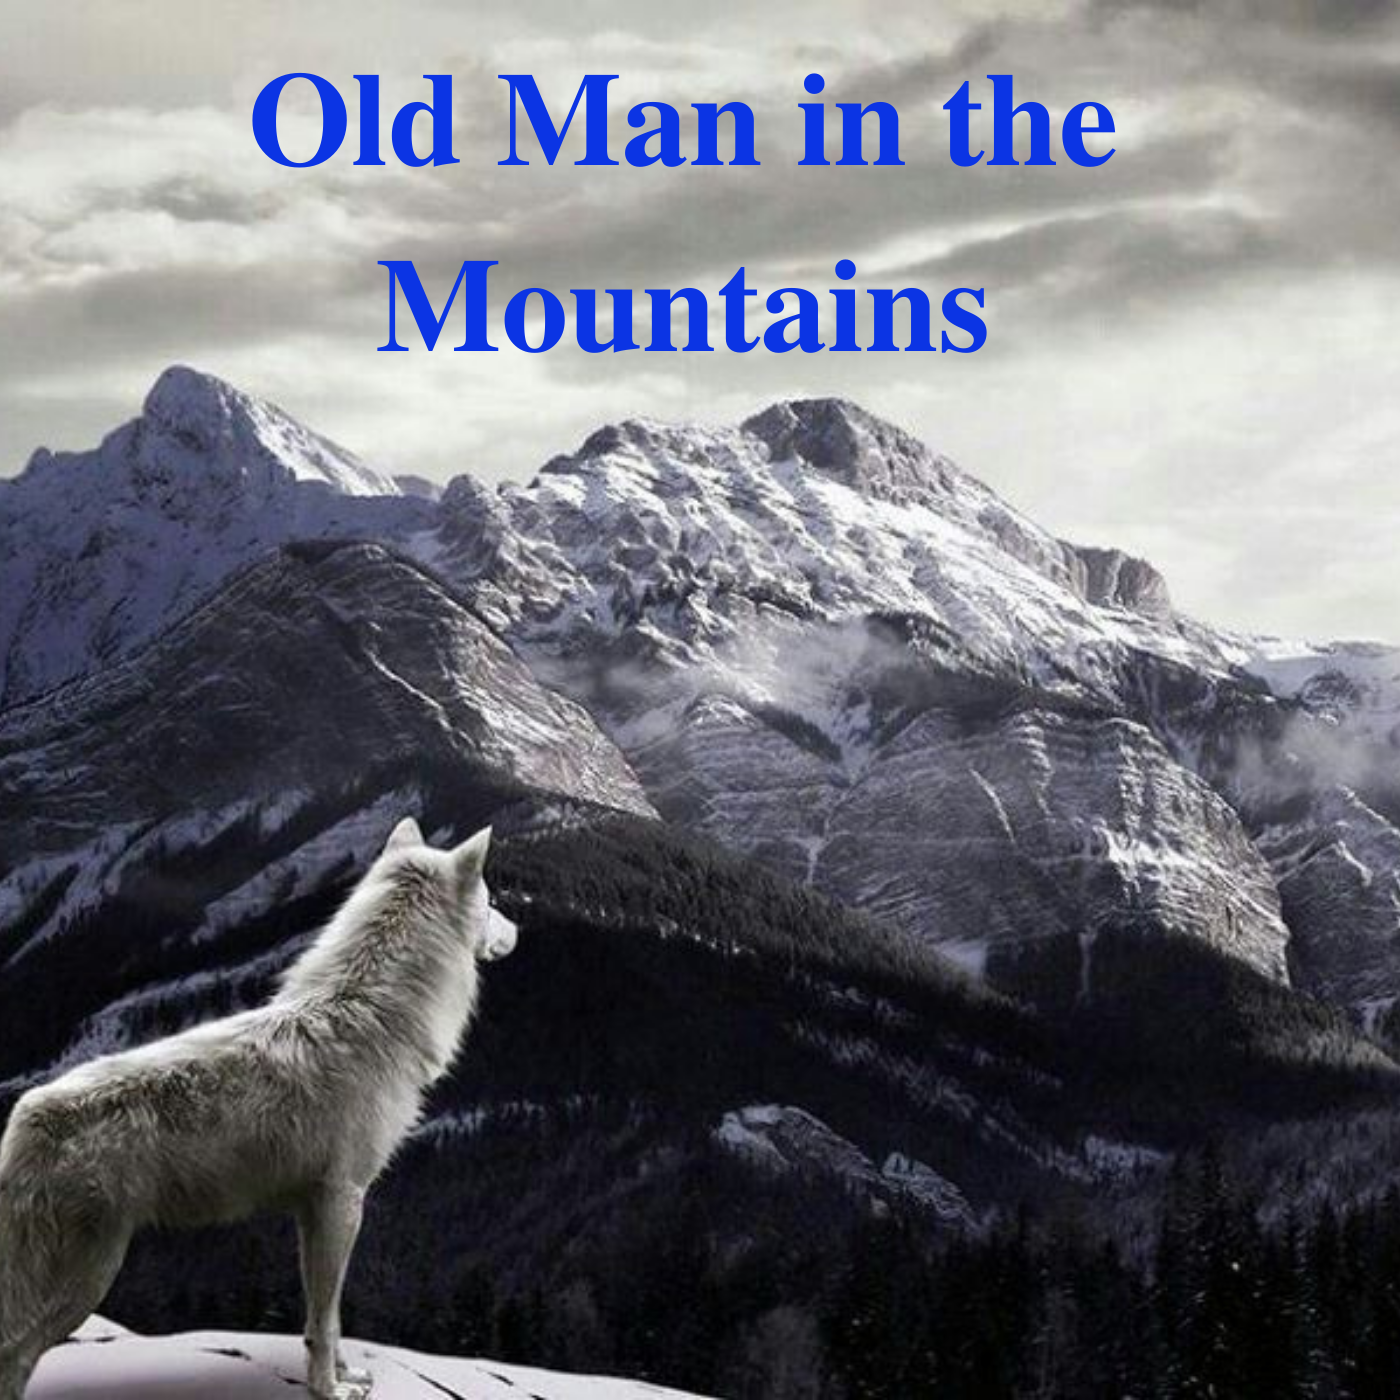 * Old Man in the Mountains